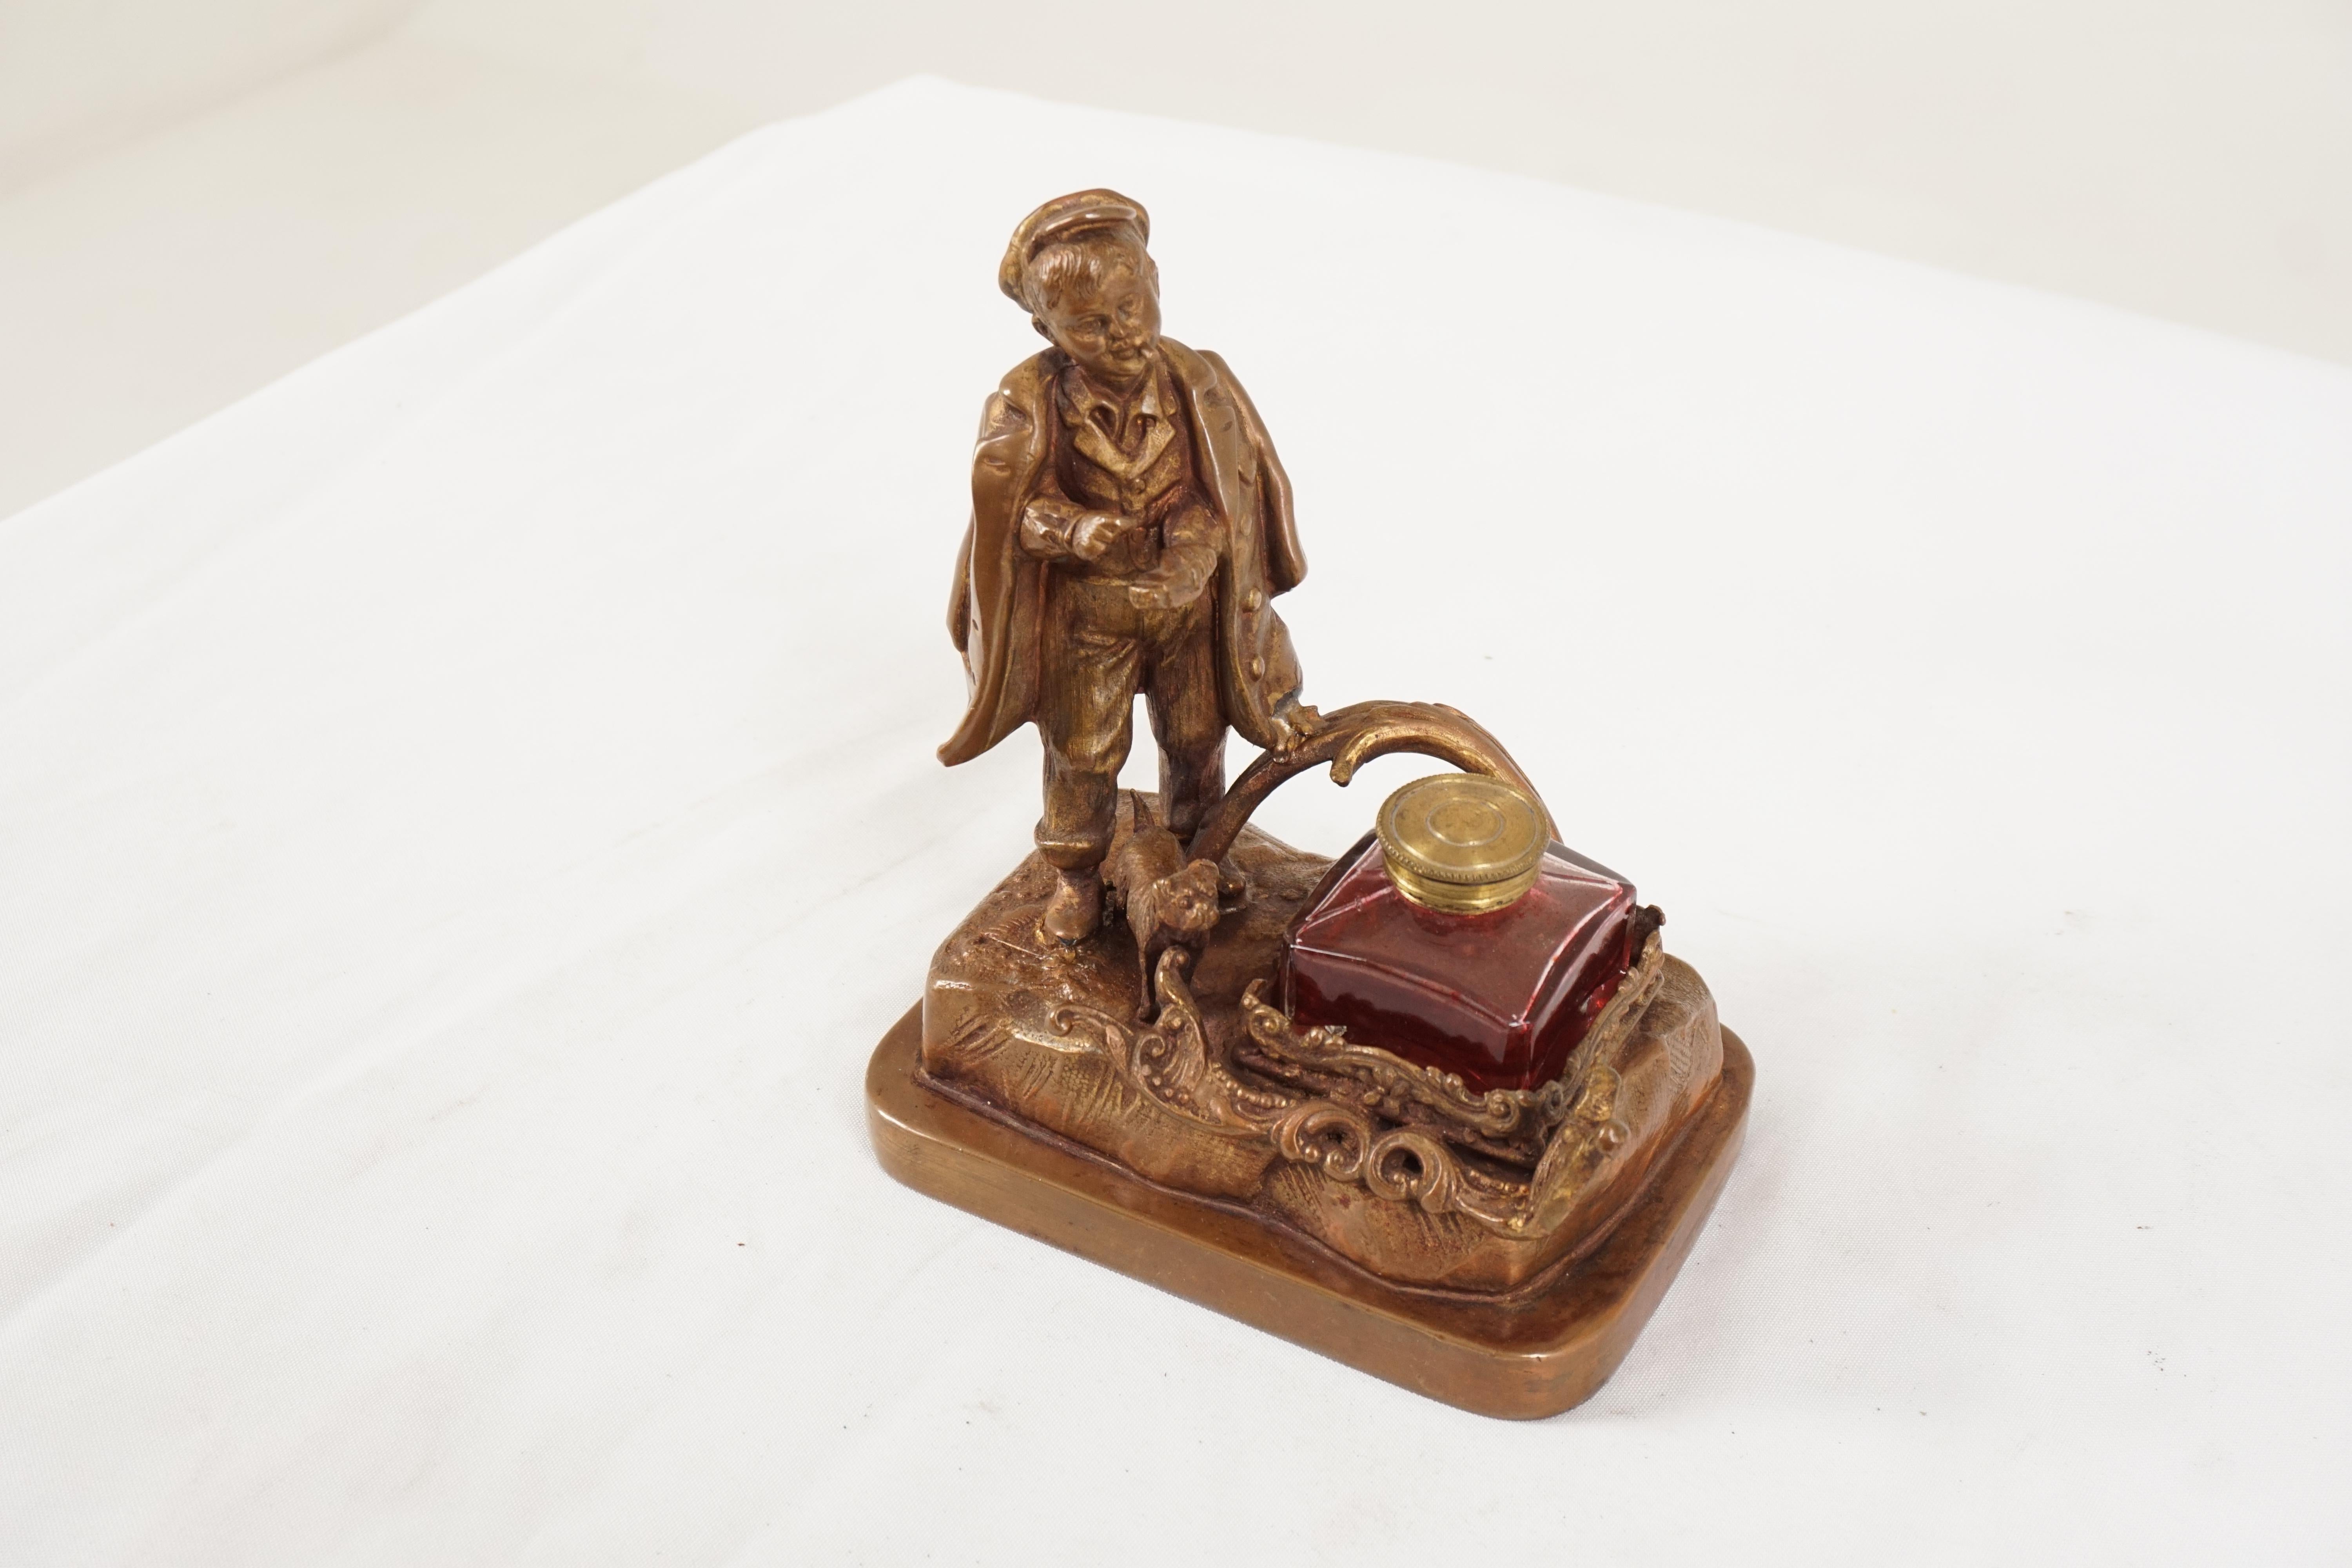 Antique Victorian Brass Inkstand, Young Boy And Dog, Scotland 1910, H555

Scotland 1910
Brass
Figure of a boy and his dog
Fitted with a square inkwell with a brass lid
Pen holder to the front
All standing on a plinth base

H555

Measures: 5.75